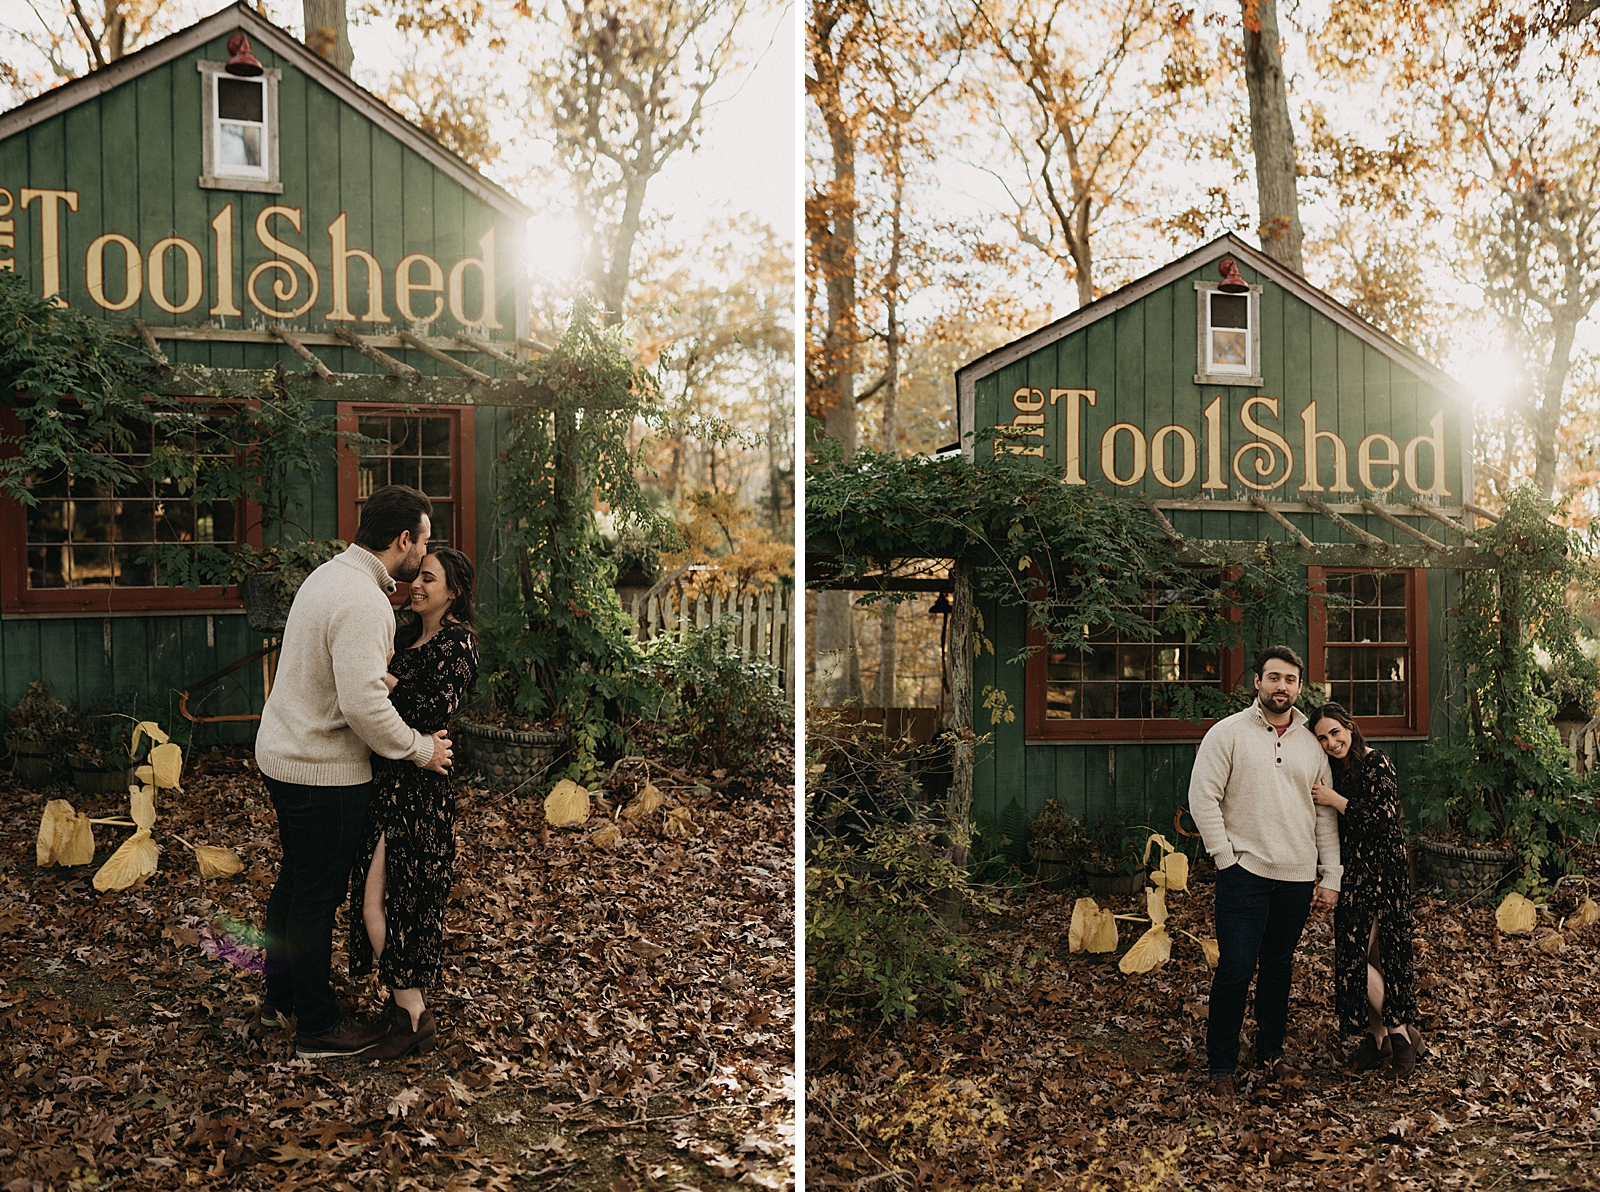 Couple holding each other and man kissing woman on forehead in front of ToolShed